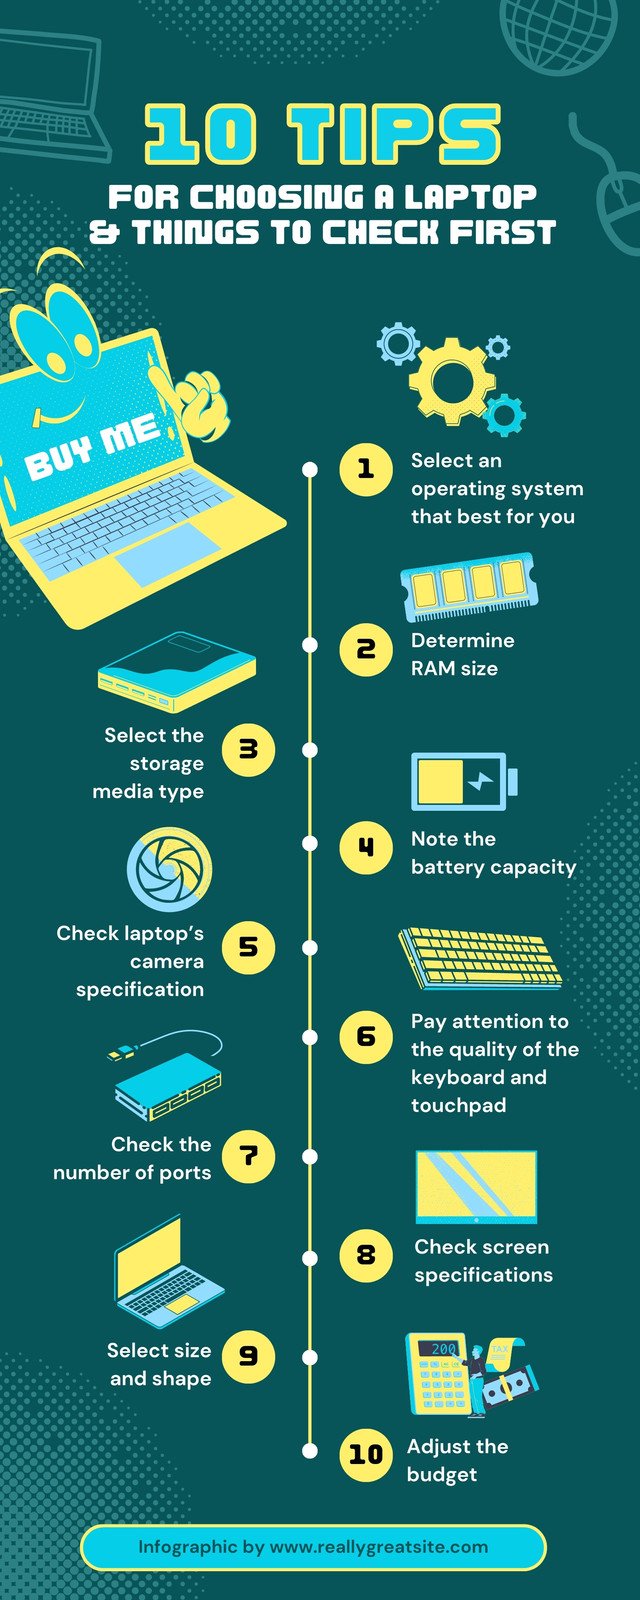 history of computers infographic